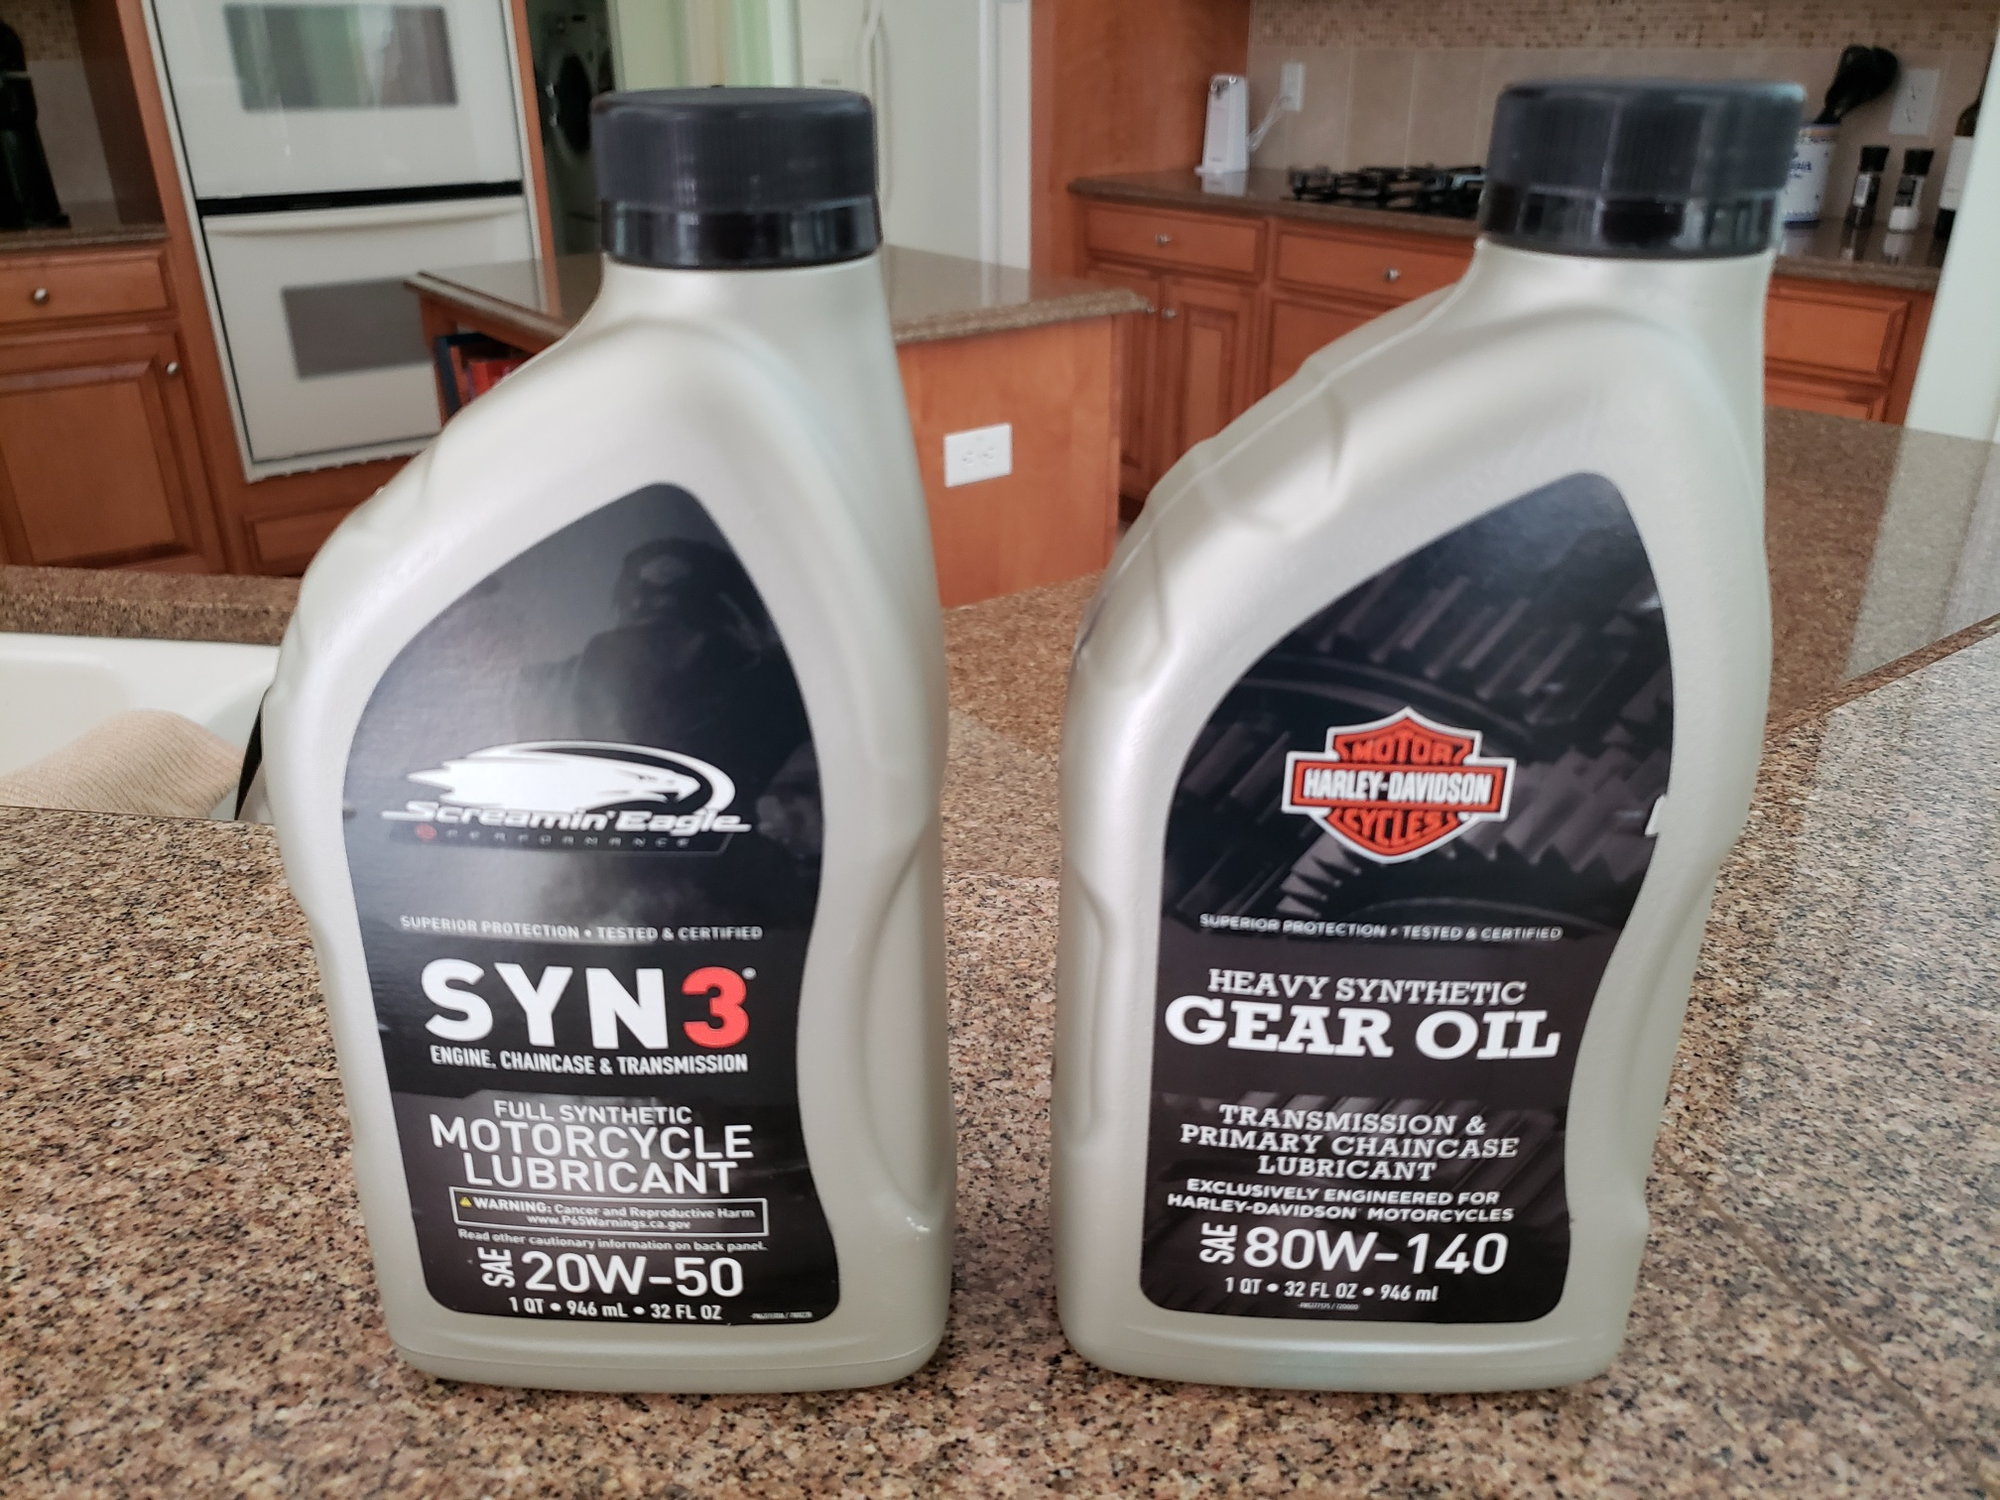 Harley Primary Oil, Engine Oil, And Transmission Fluid Difference Should You Use One Or Three Oils